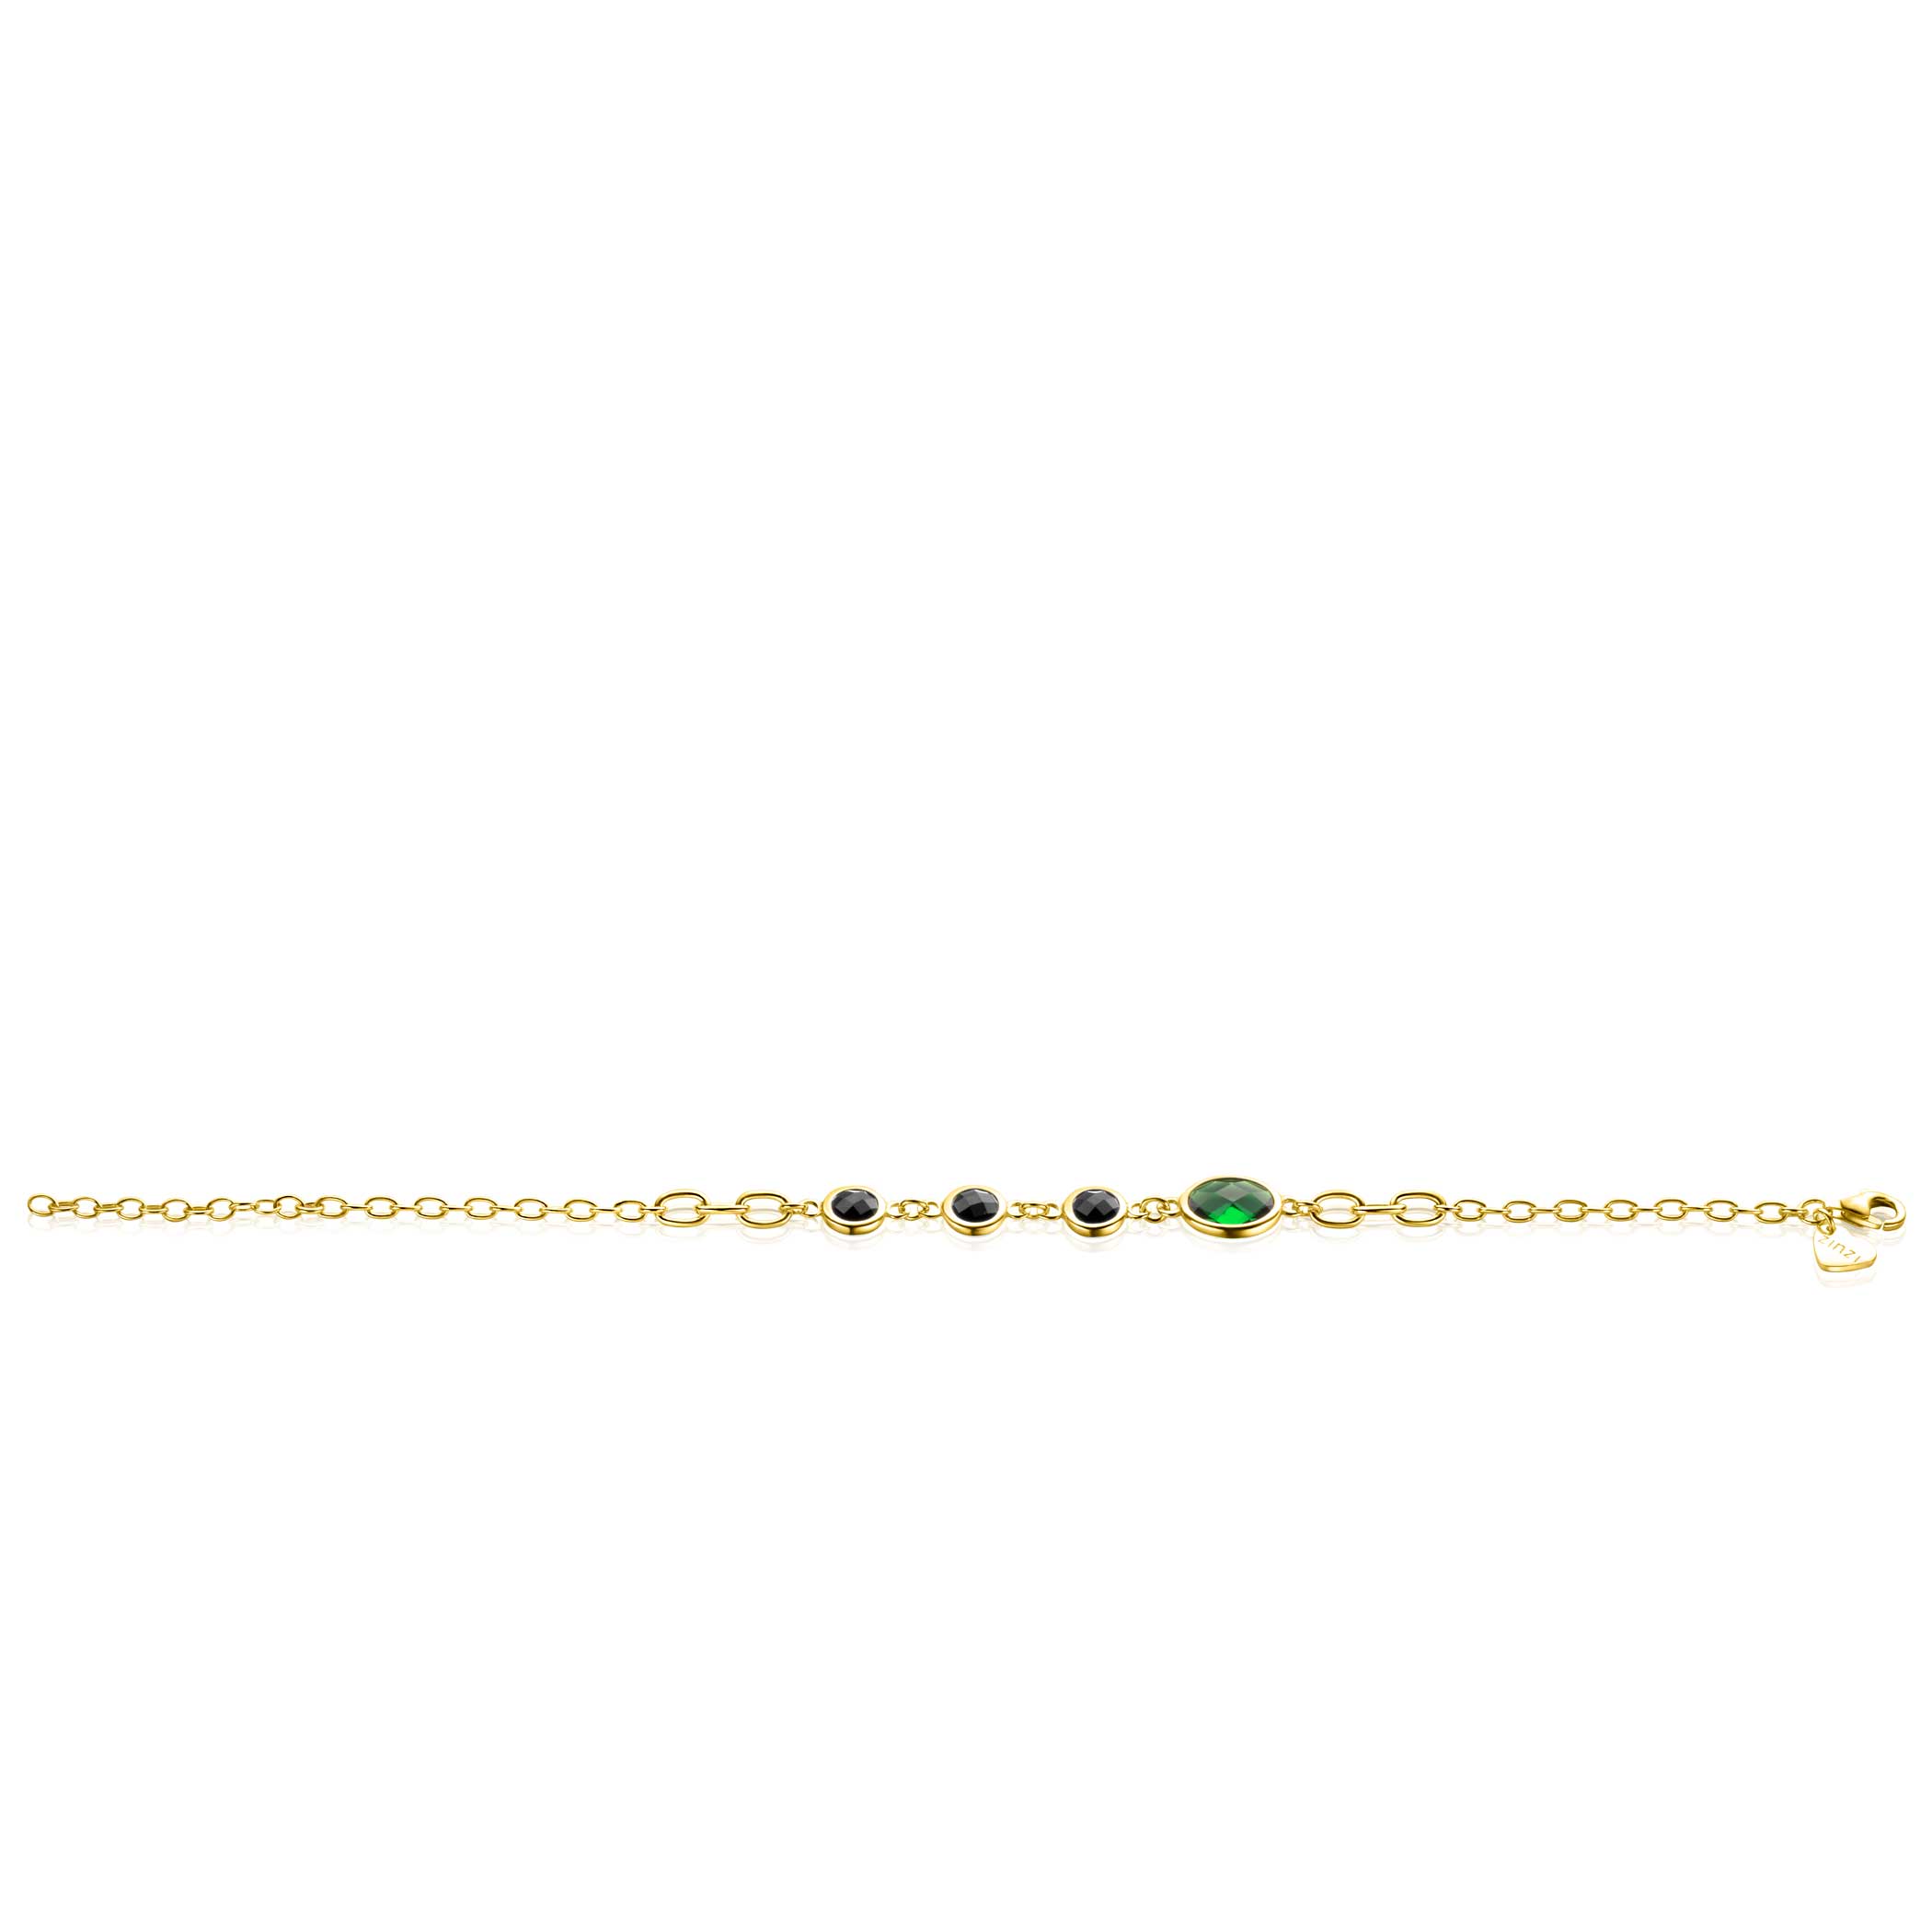 ZINZI Gold Plated Sterling Silver Chain Bracelet with 3 Round Settings with Black Stone and 1 Oval Setting with Green Stone 17-20 cm ZIA2389